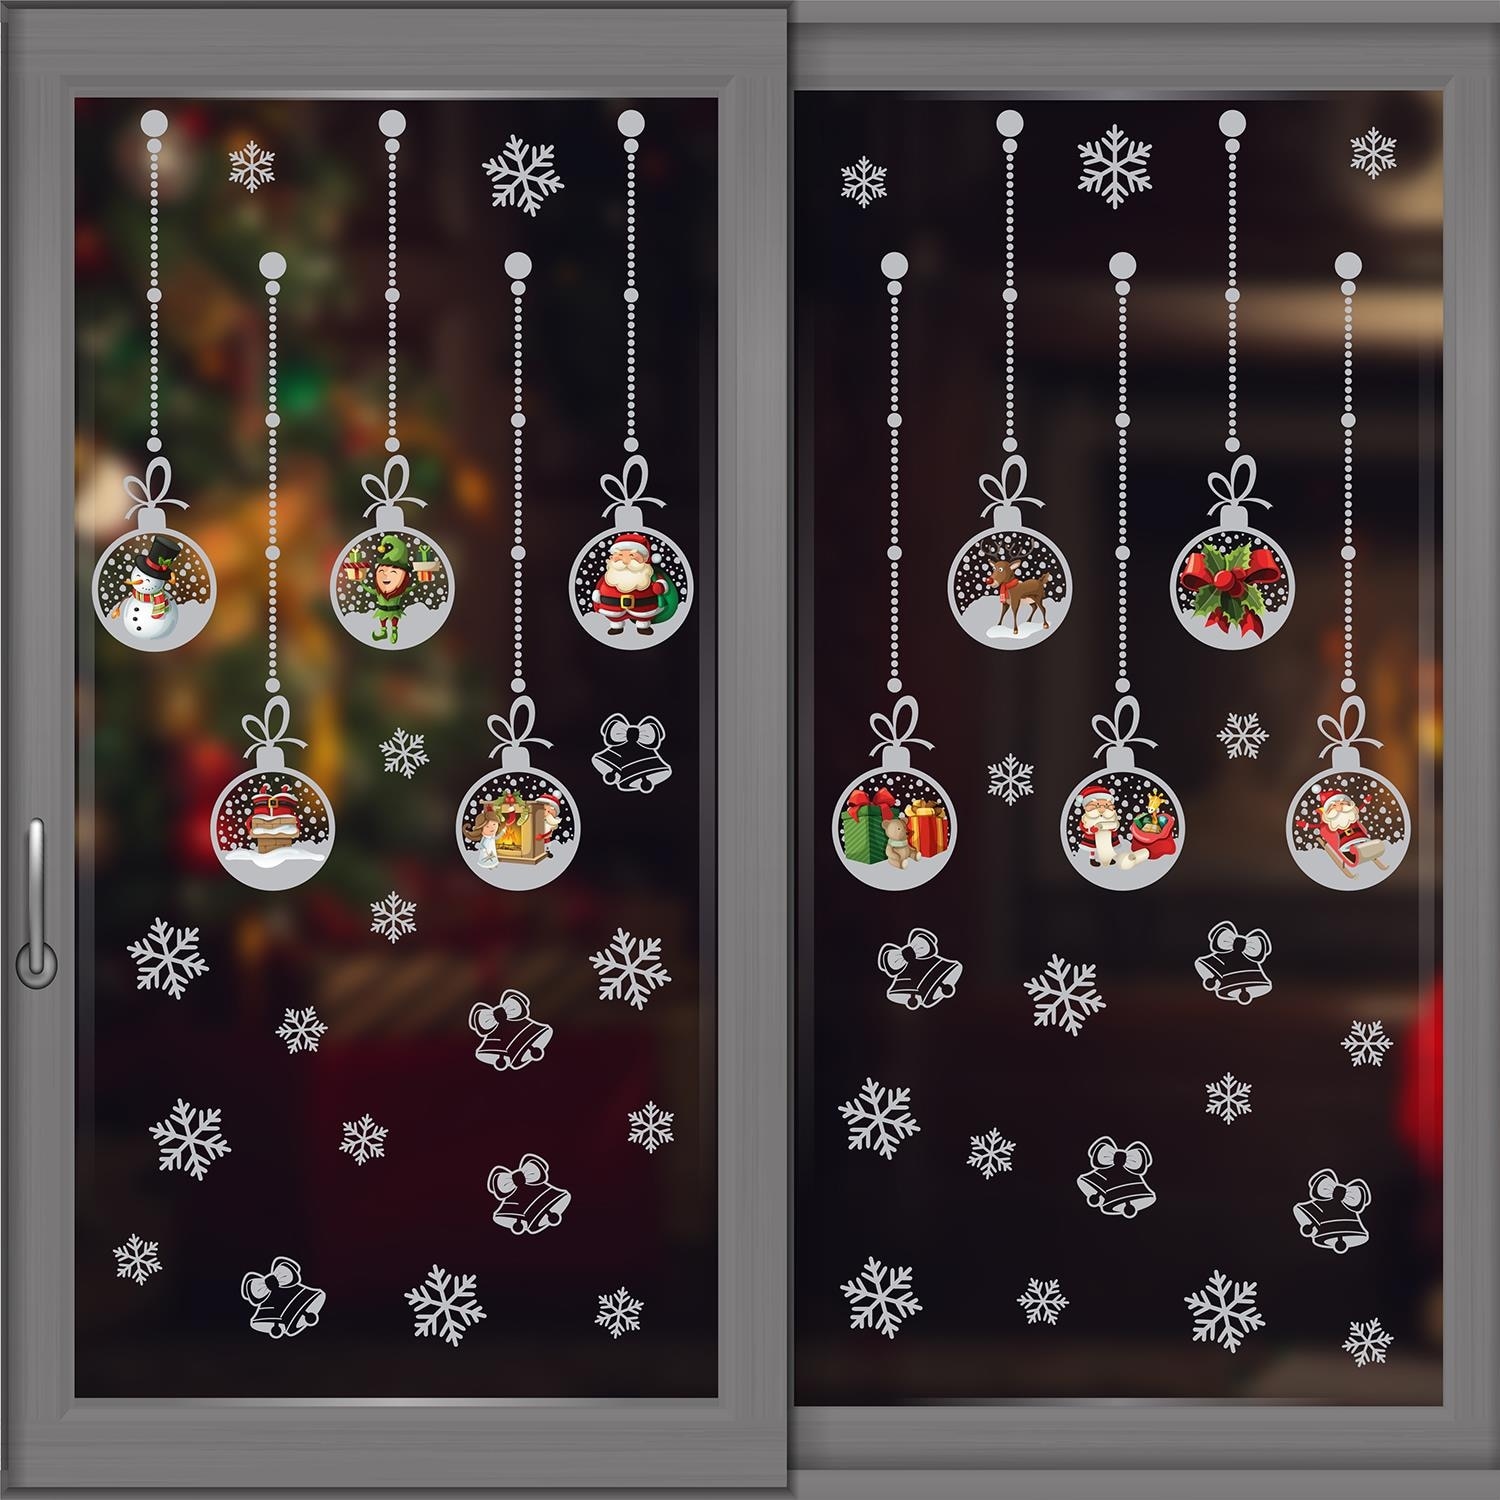 https://ak1.ostkcdn.com/images/products/is/images/direct/8978a0a0a4e83ff4c955bc4fbdf3ed5ad2866ee7/Walplus-45pcs-Matt-Silver-Christmas-Ornaments-Wall-Stickers-Wall-Decals-Stickers-Self-Adhesive-Removable-Home-Decors-Holiday-Art.jpg